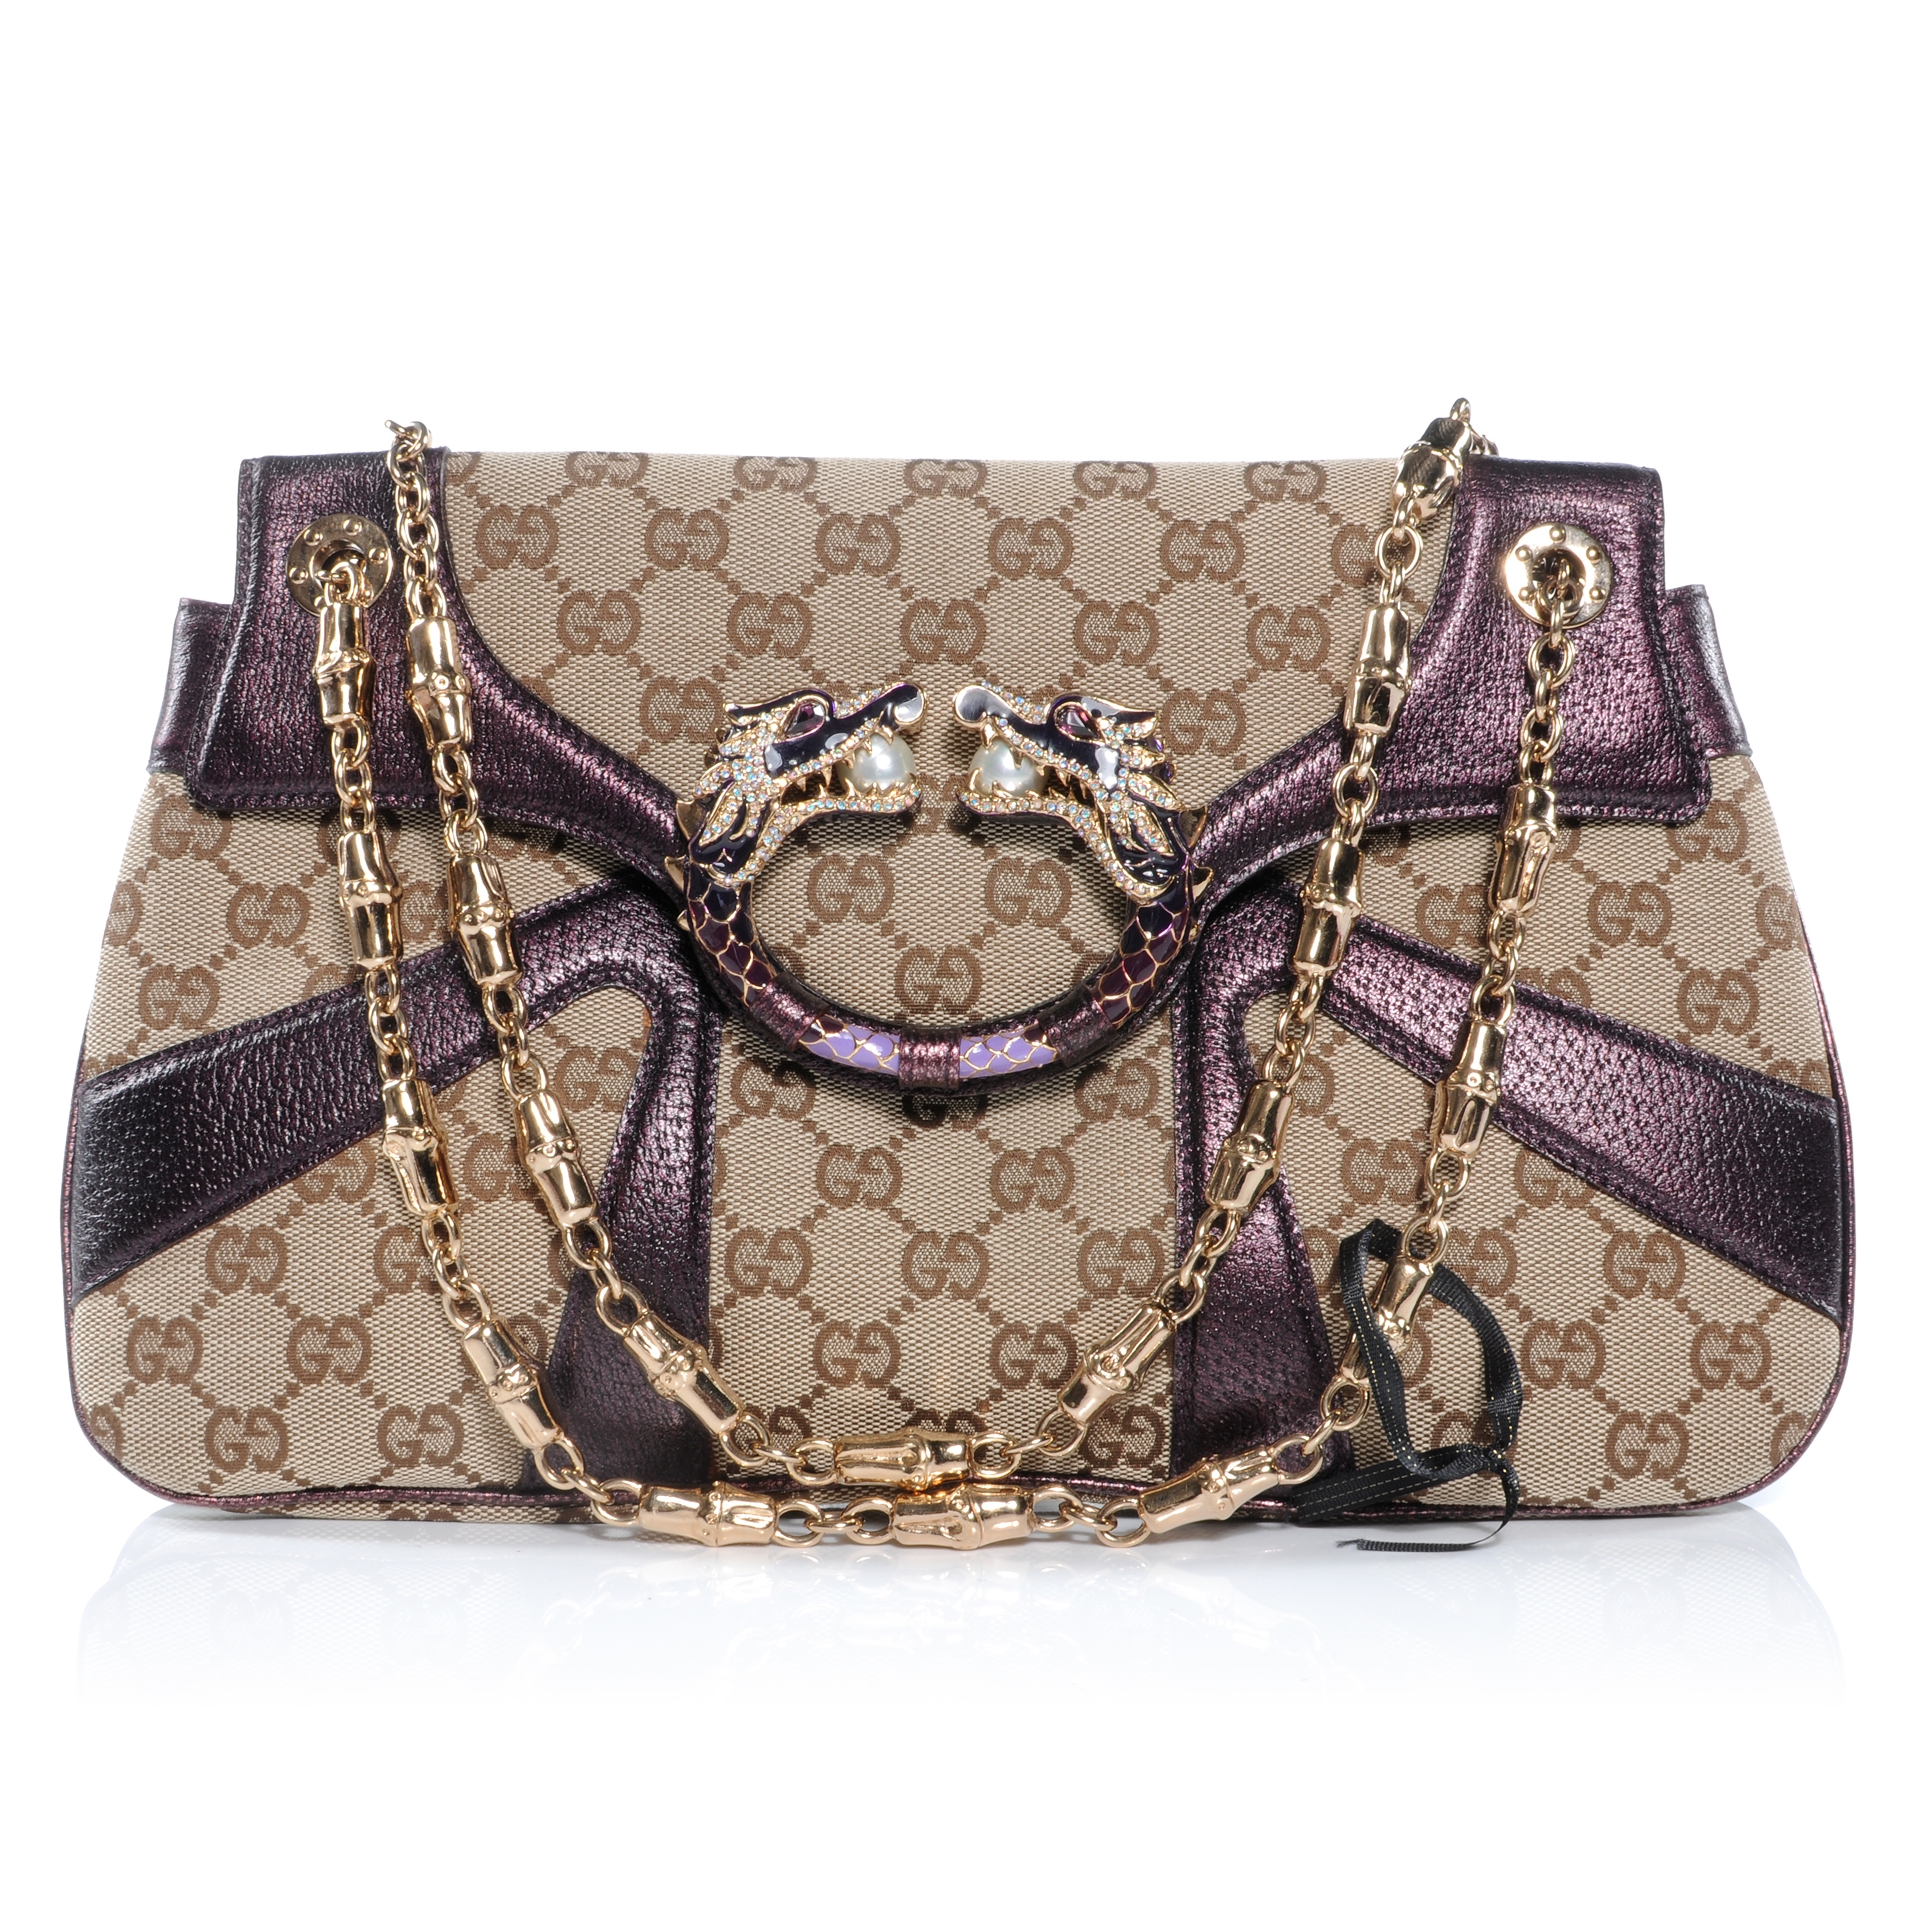 Tom Ford Gucci Bag, Buy Now, Best Sale, 56% OFF, 